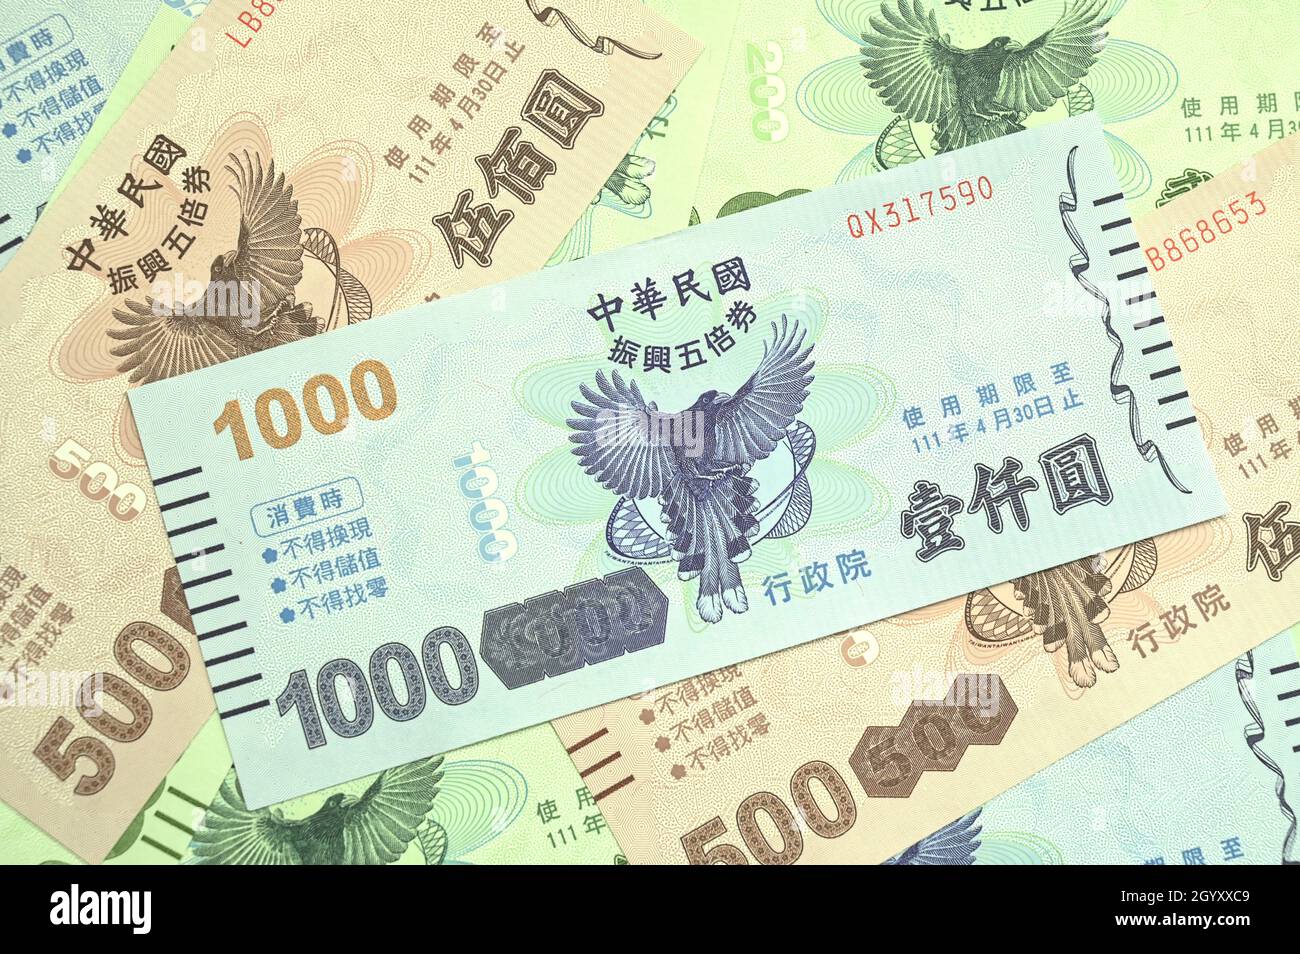 Taipei, Taiwan - Oct 10, 2021 : Quintuple Stimulus Voucher. Taiwan government issued the stimulus voucher to give the economy a boost. Stock Photo